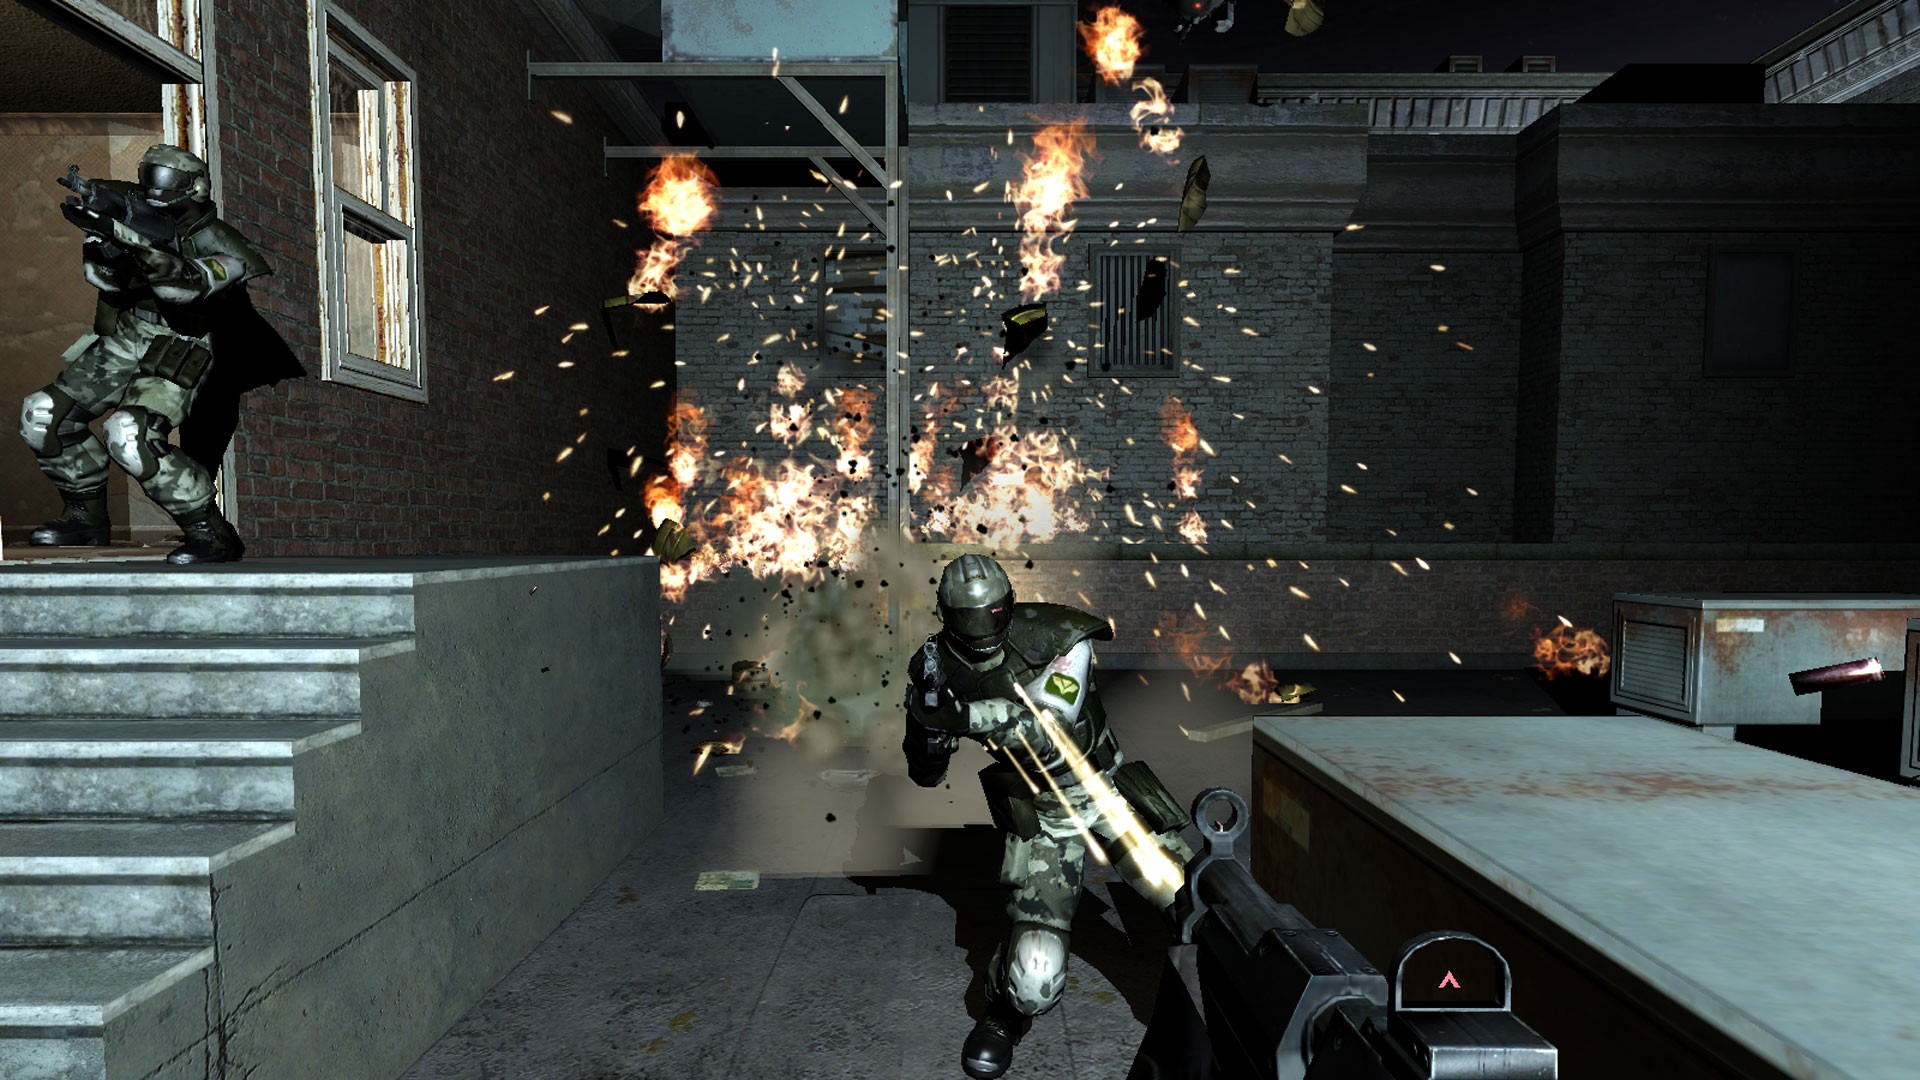 Screenshot from the game. The player is firing at an enemy right in front of them, sending shrapnel everywhere. There is a second enemy emerging from a doorway on the left.